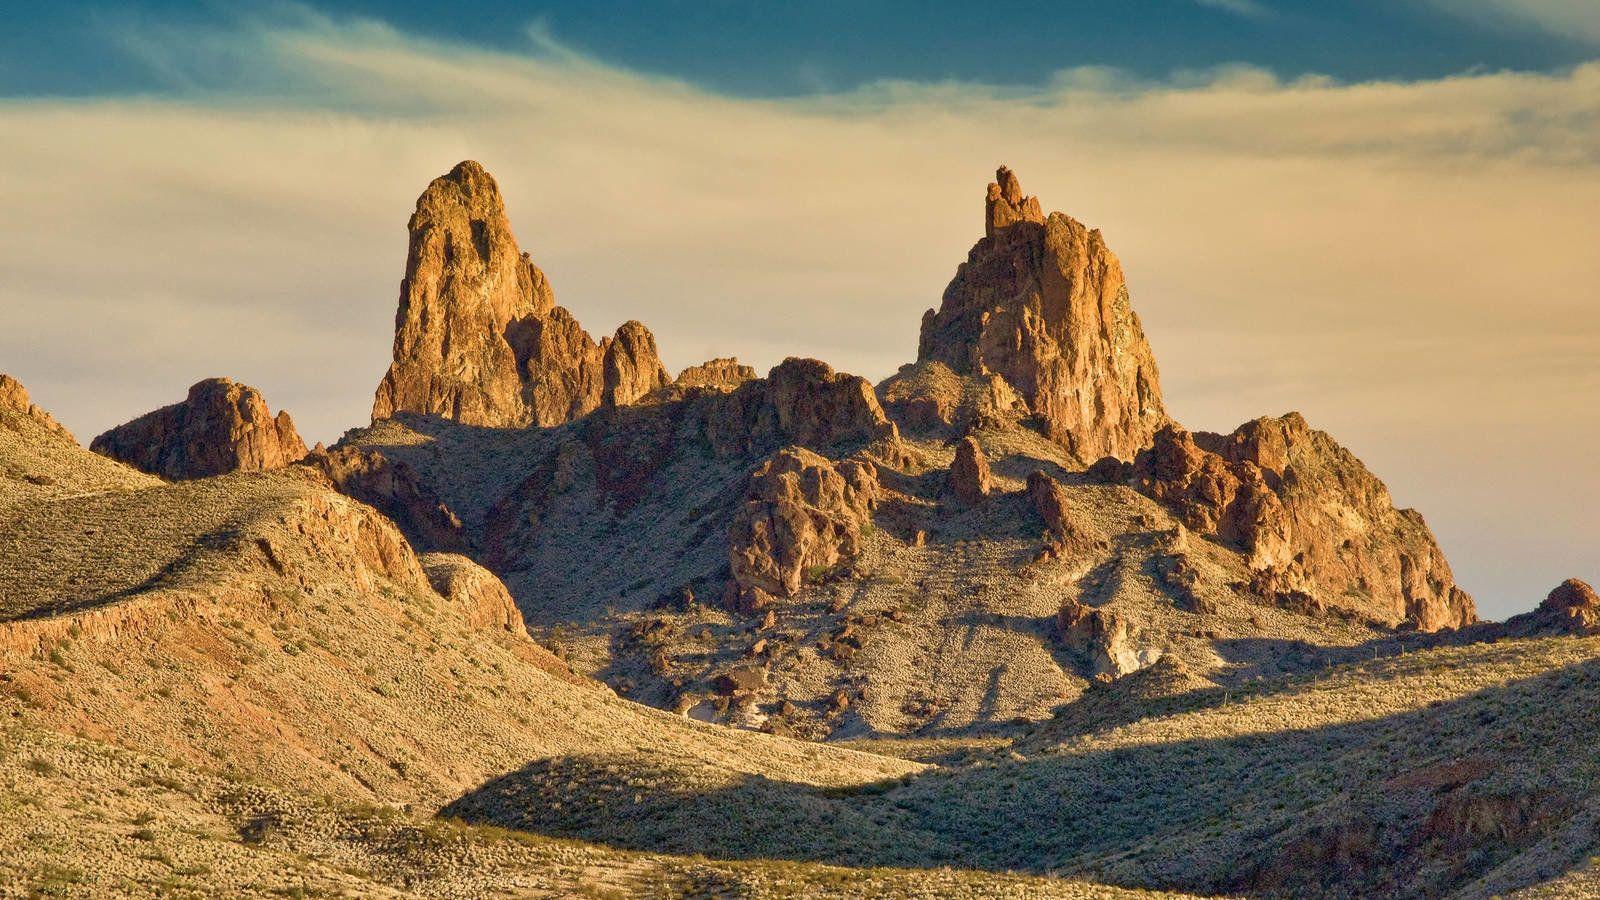 Petition · Don't build the border wall in Big Bend National Park